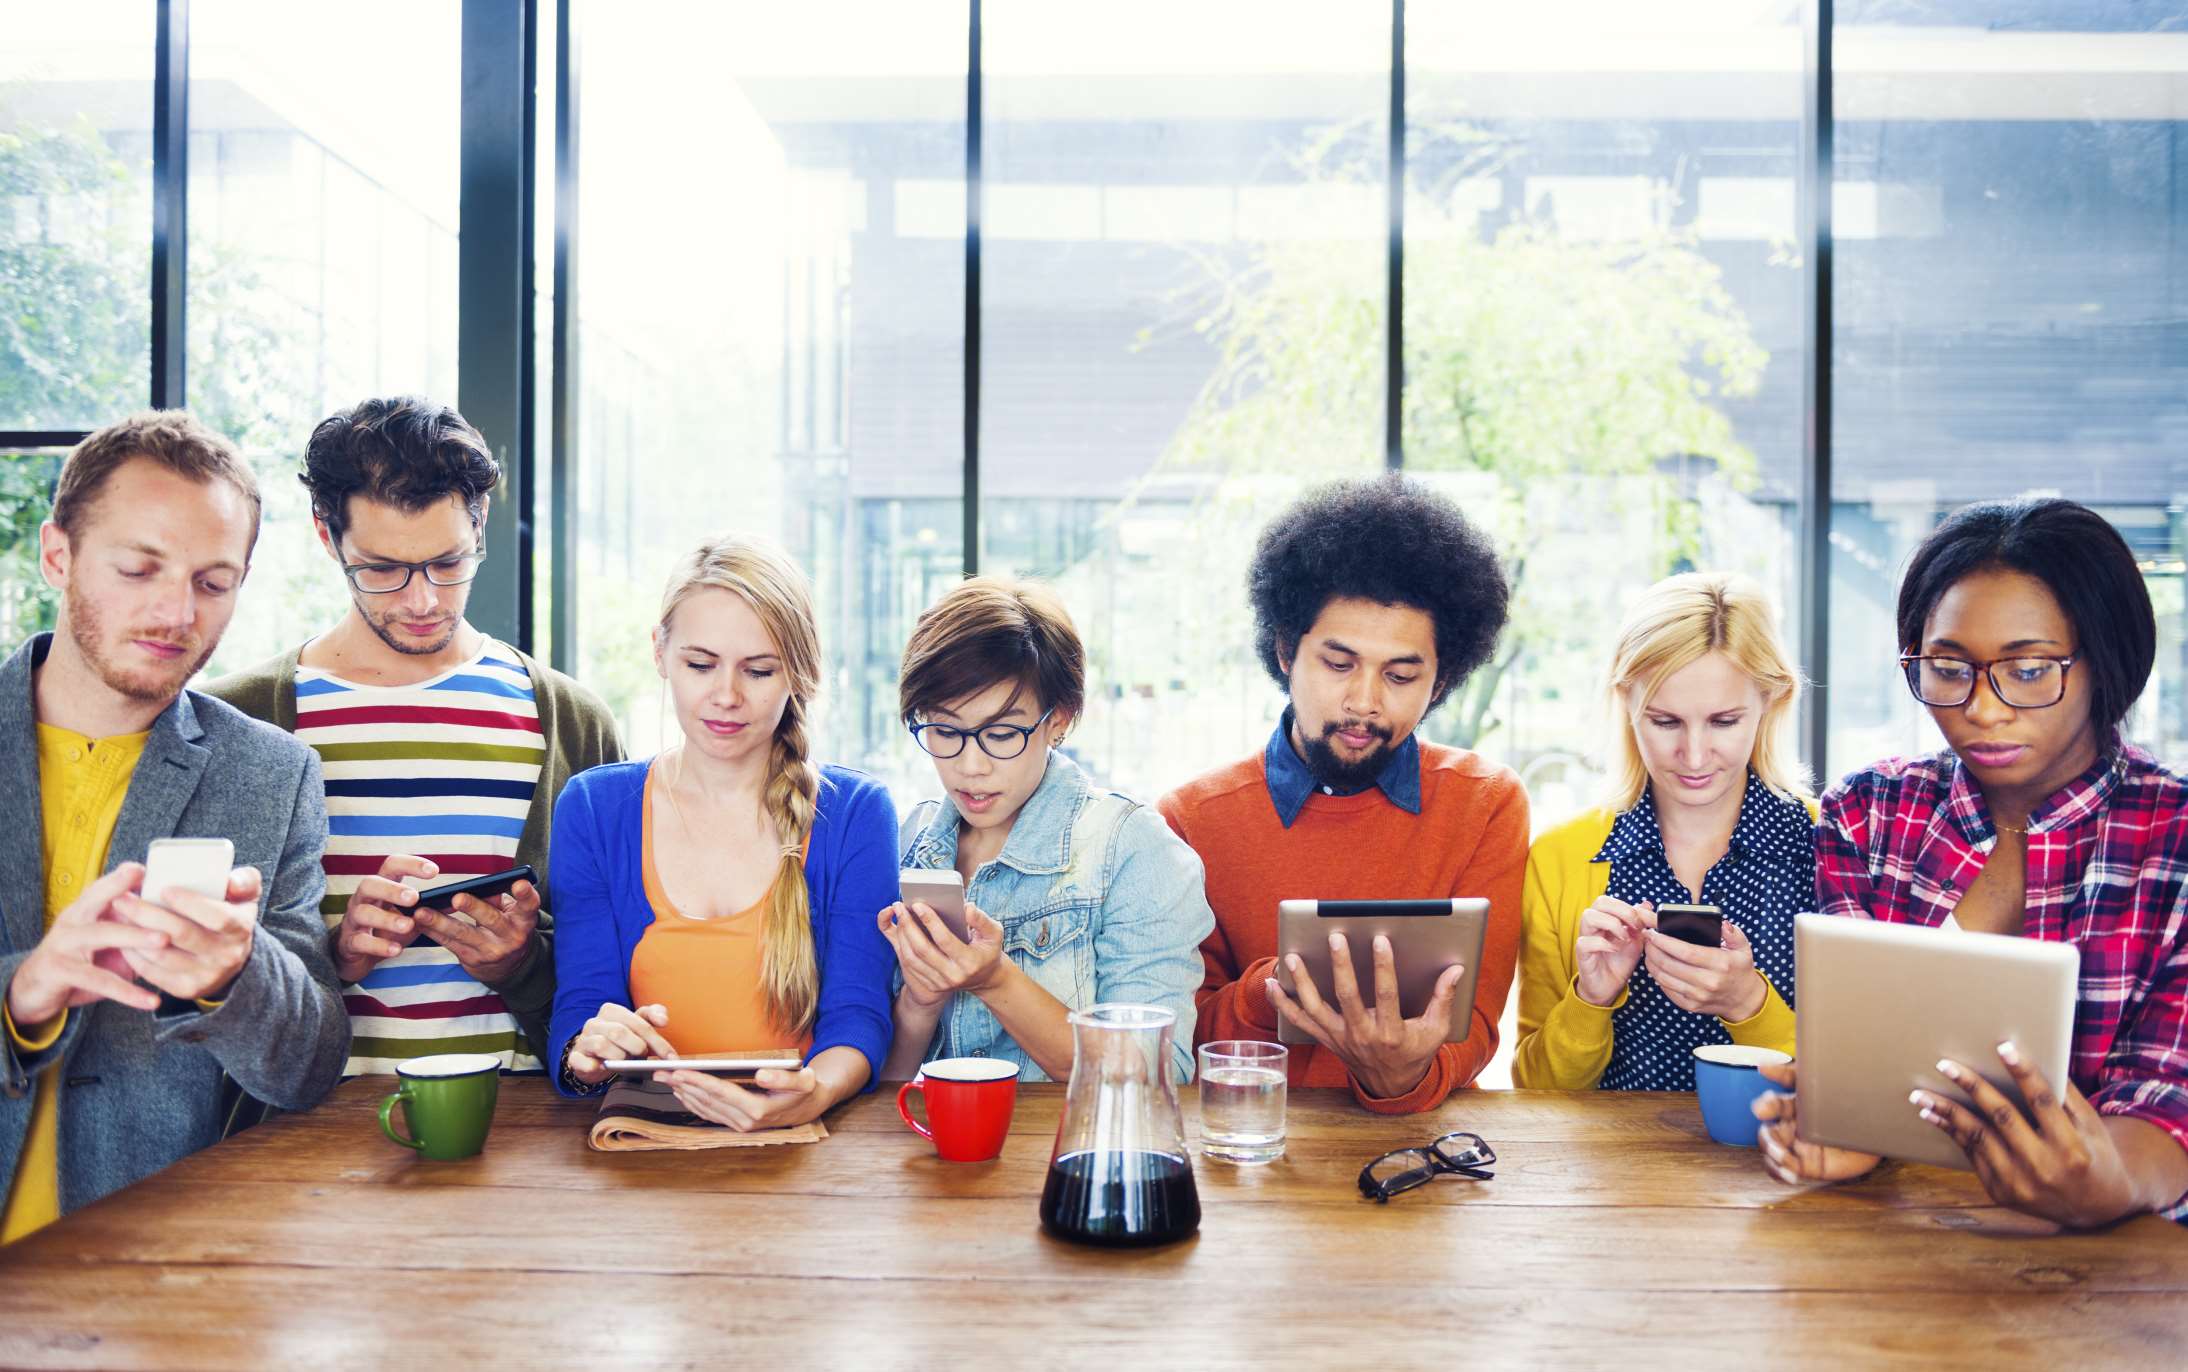 What millennials want in the workplace